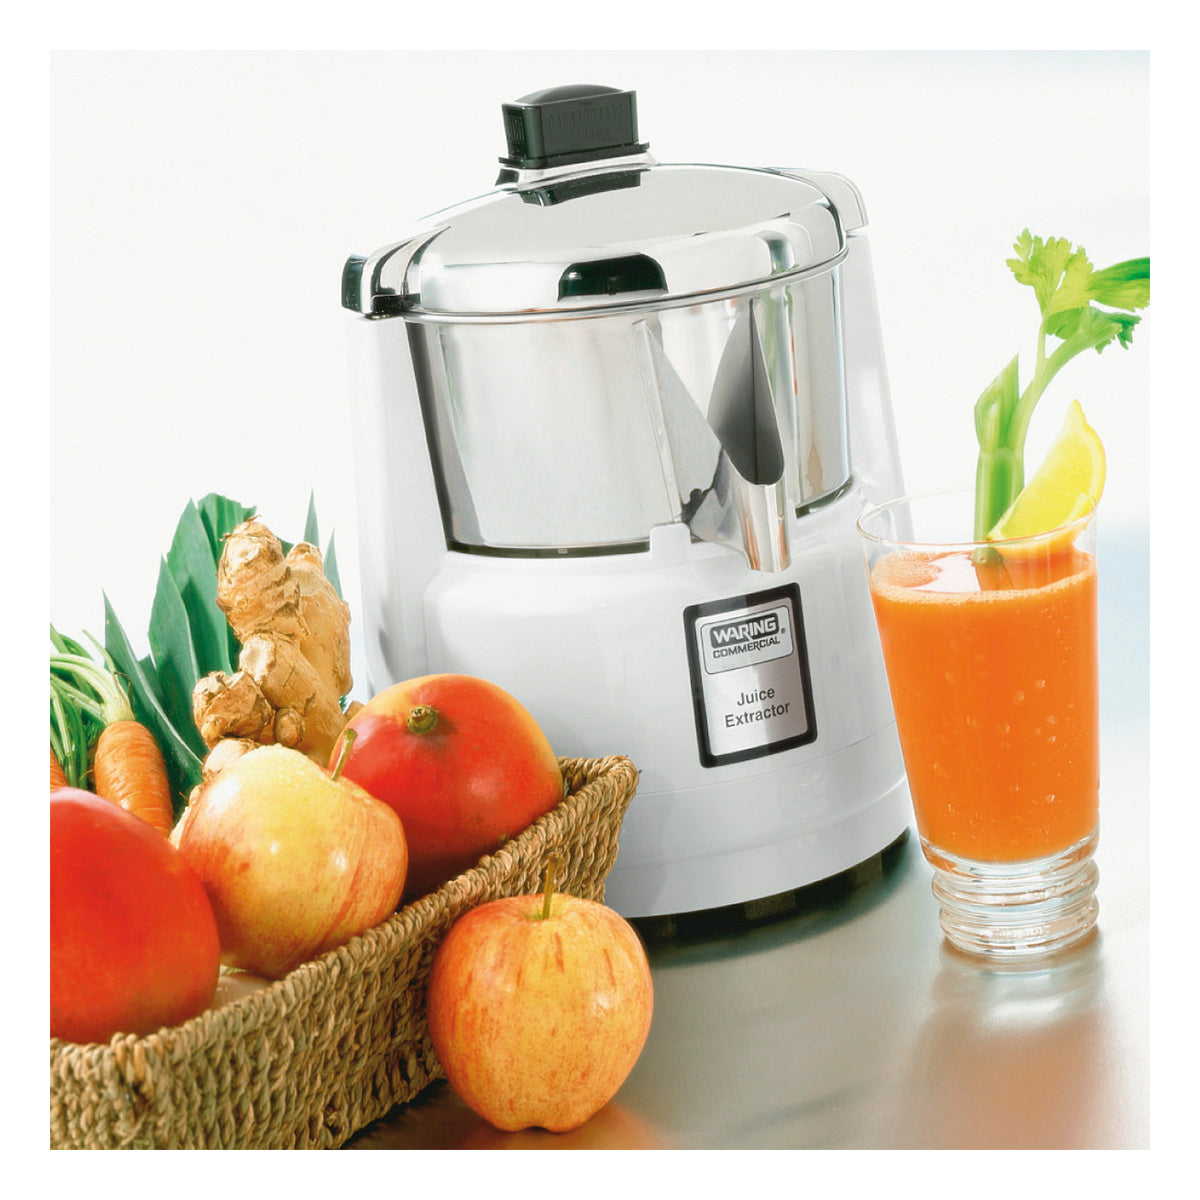 Waring WJX80X Heavy Duty Centrifugal Juicer w/ 12 qt Pulp Container, 120V